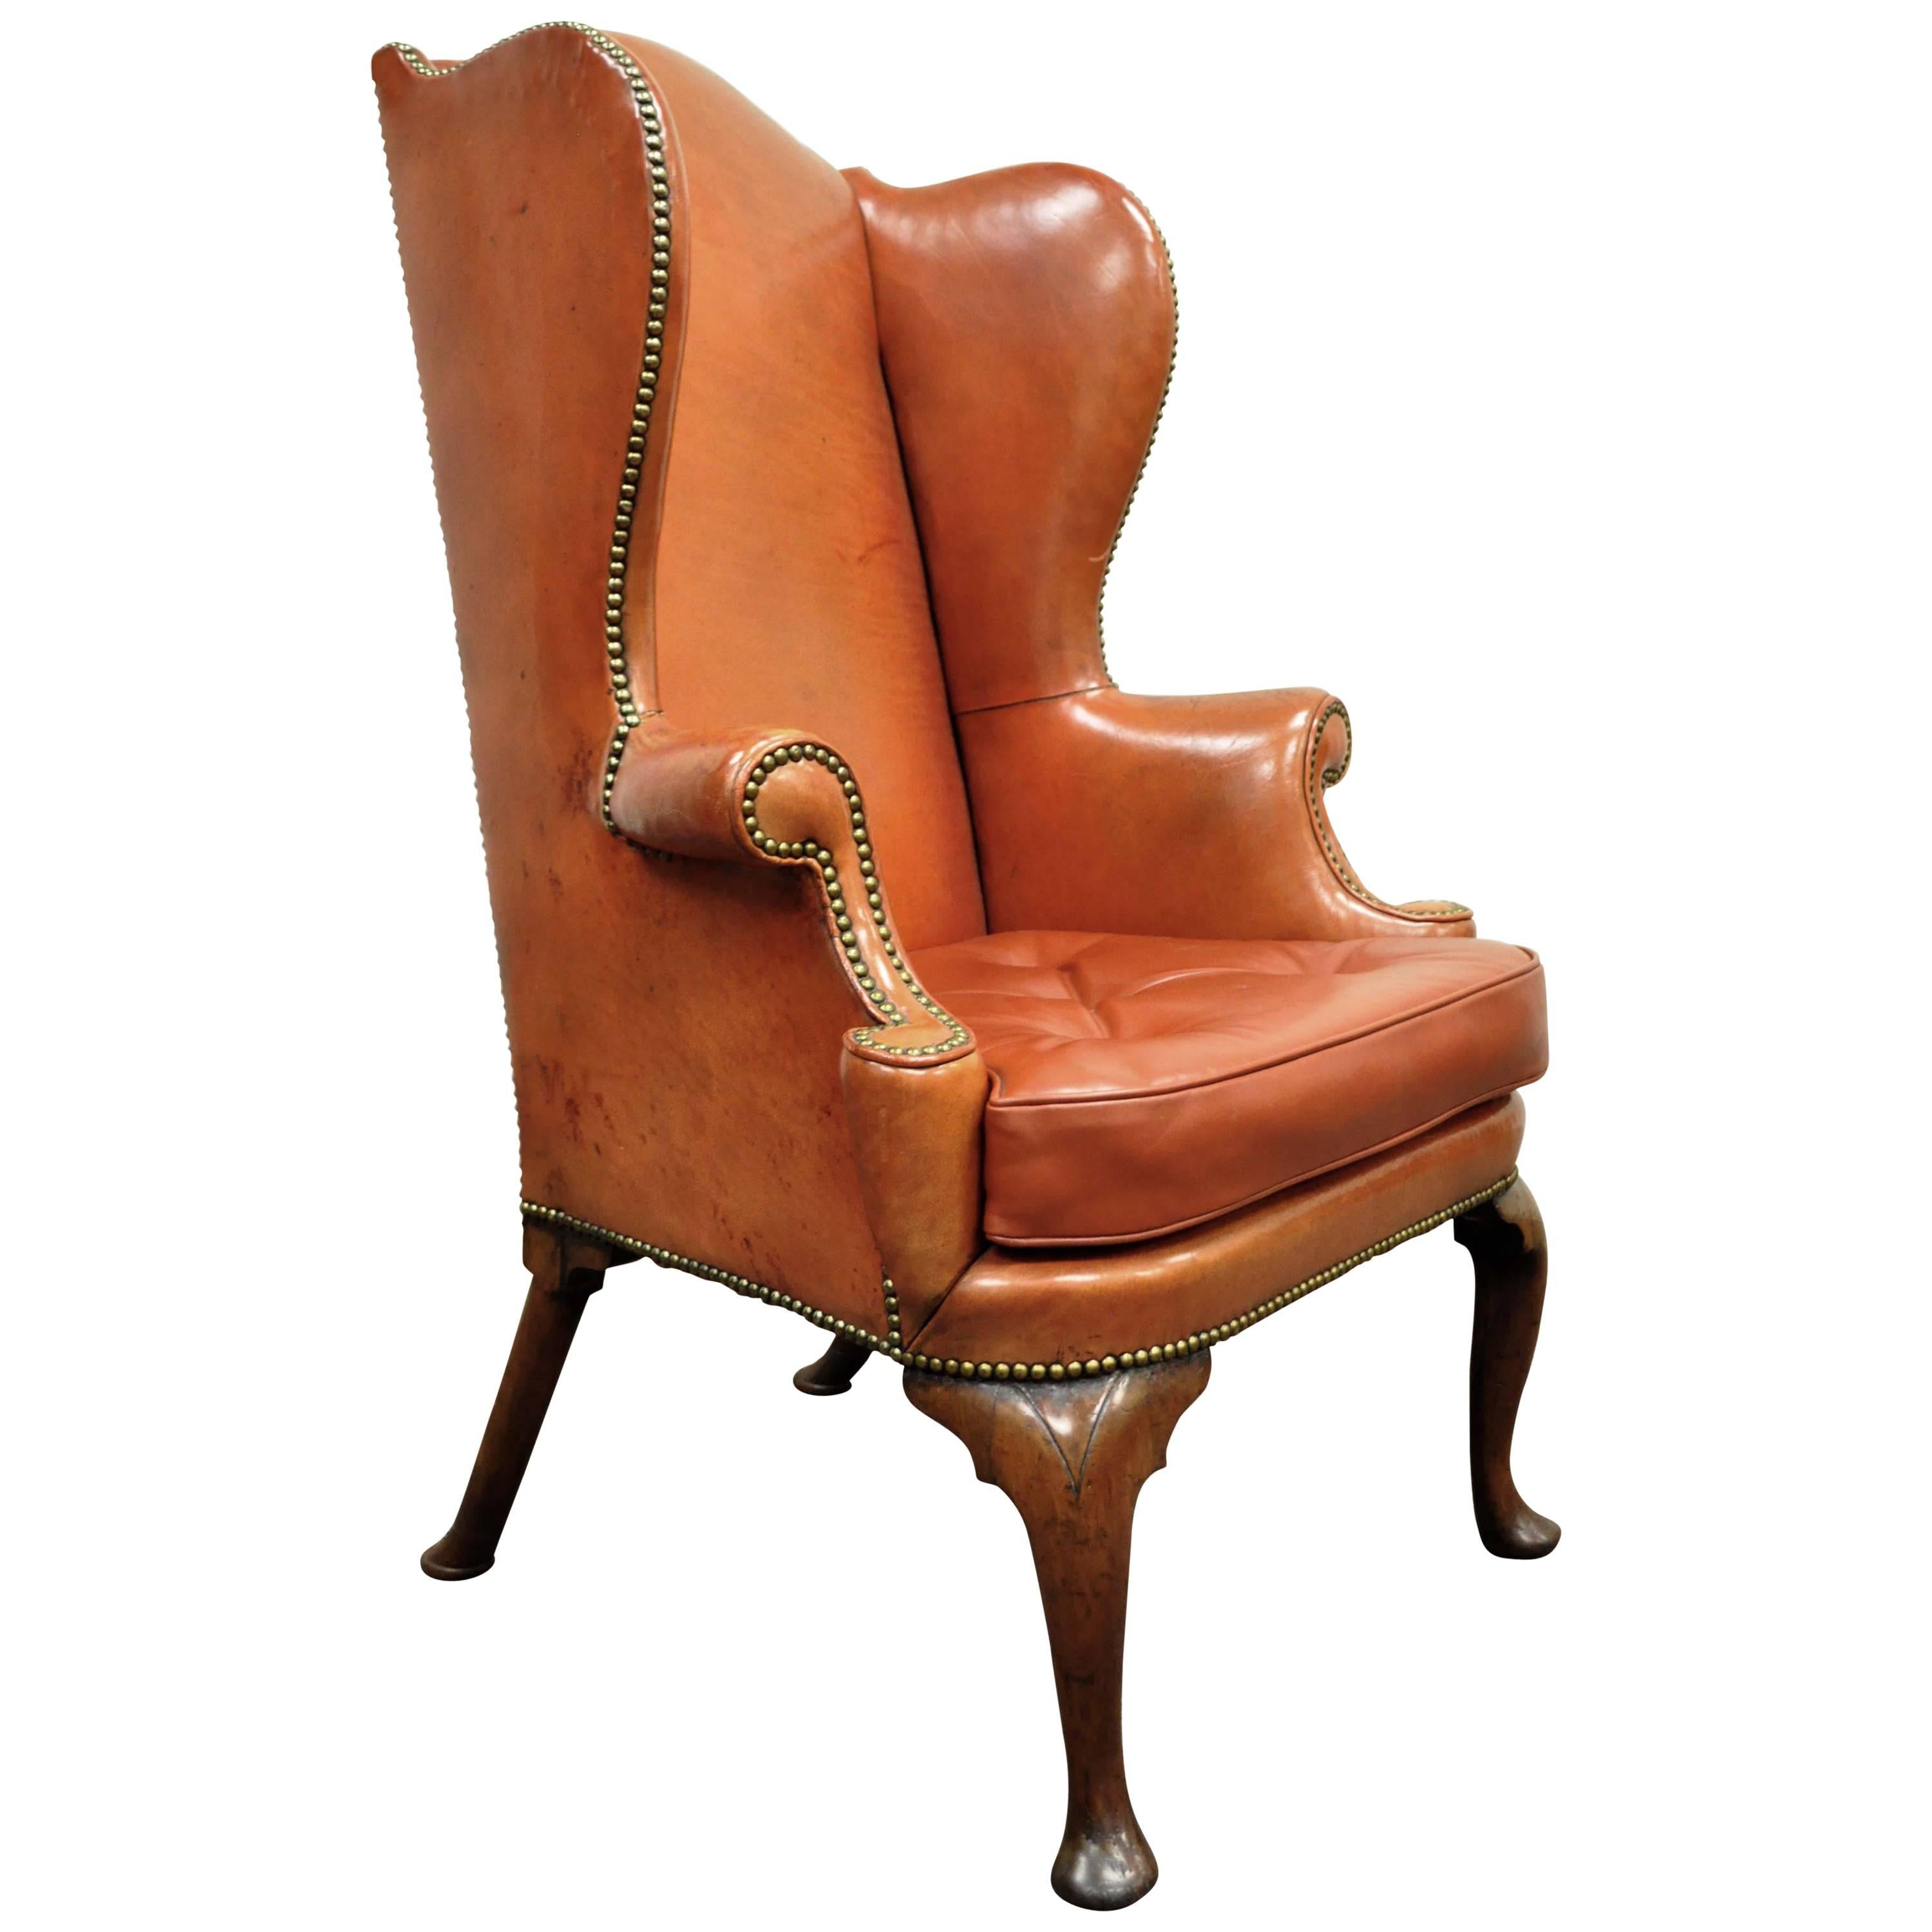 Antique 19th Century Burnt Orange Distressed Leather English Wingback Chair